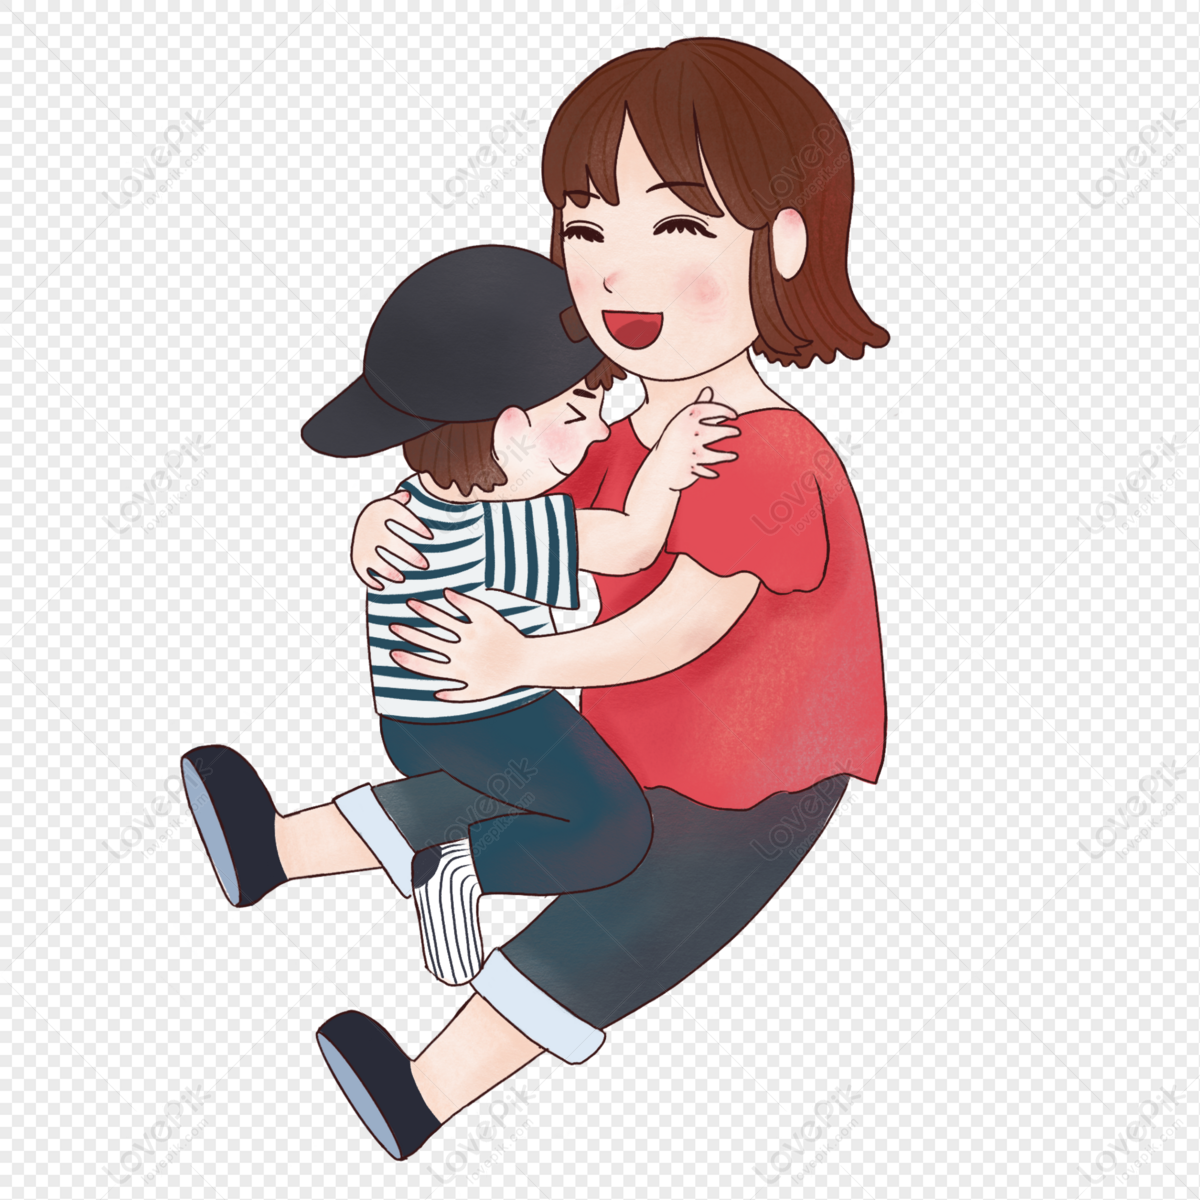 Mother Holding Her Baby PNG Picture And Clipart Image For Free Download ...